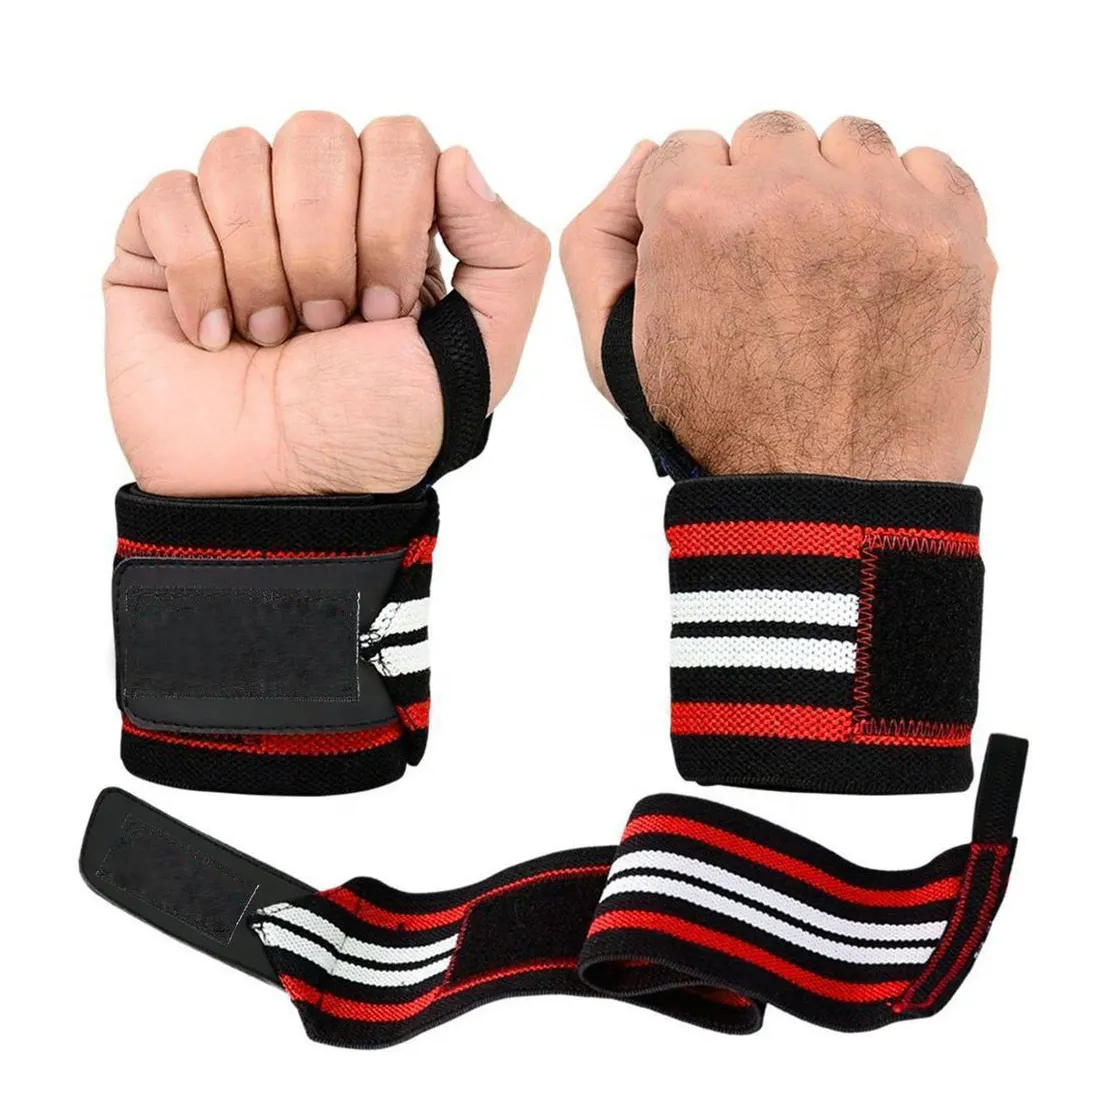 Boxing Muay Hand Wraps for sale Custom made logo Design OEM Service Cotton Polyester Hand Wraps in low price Cotton Polyester